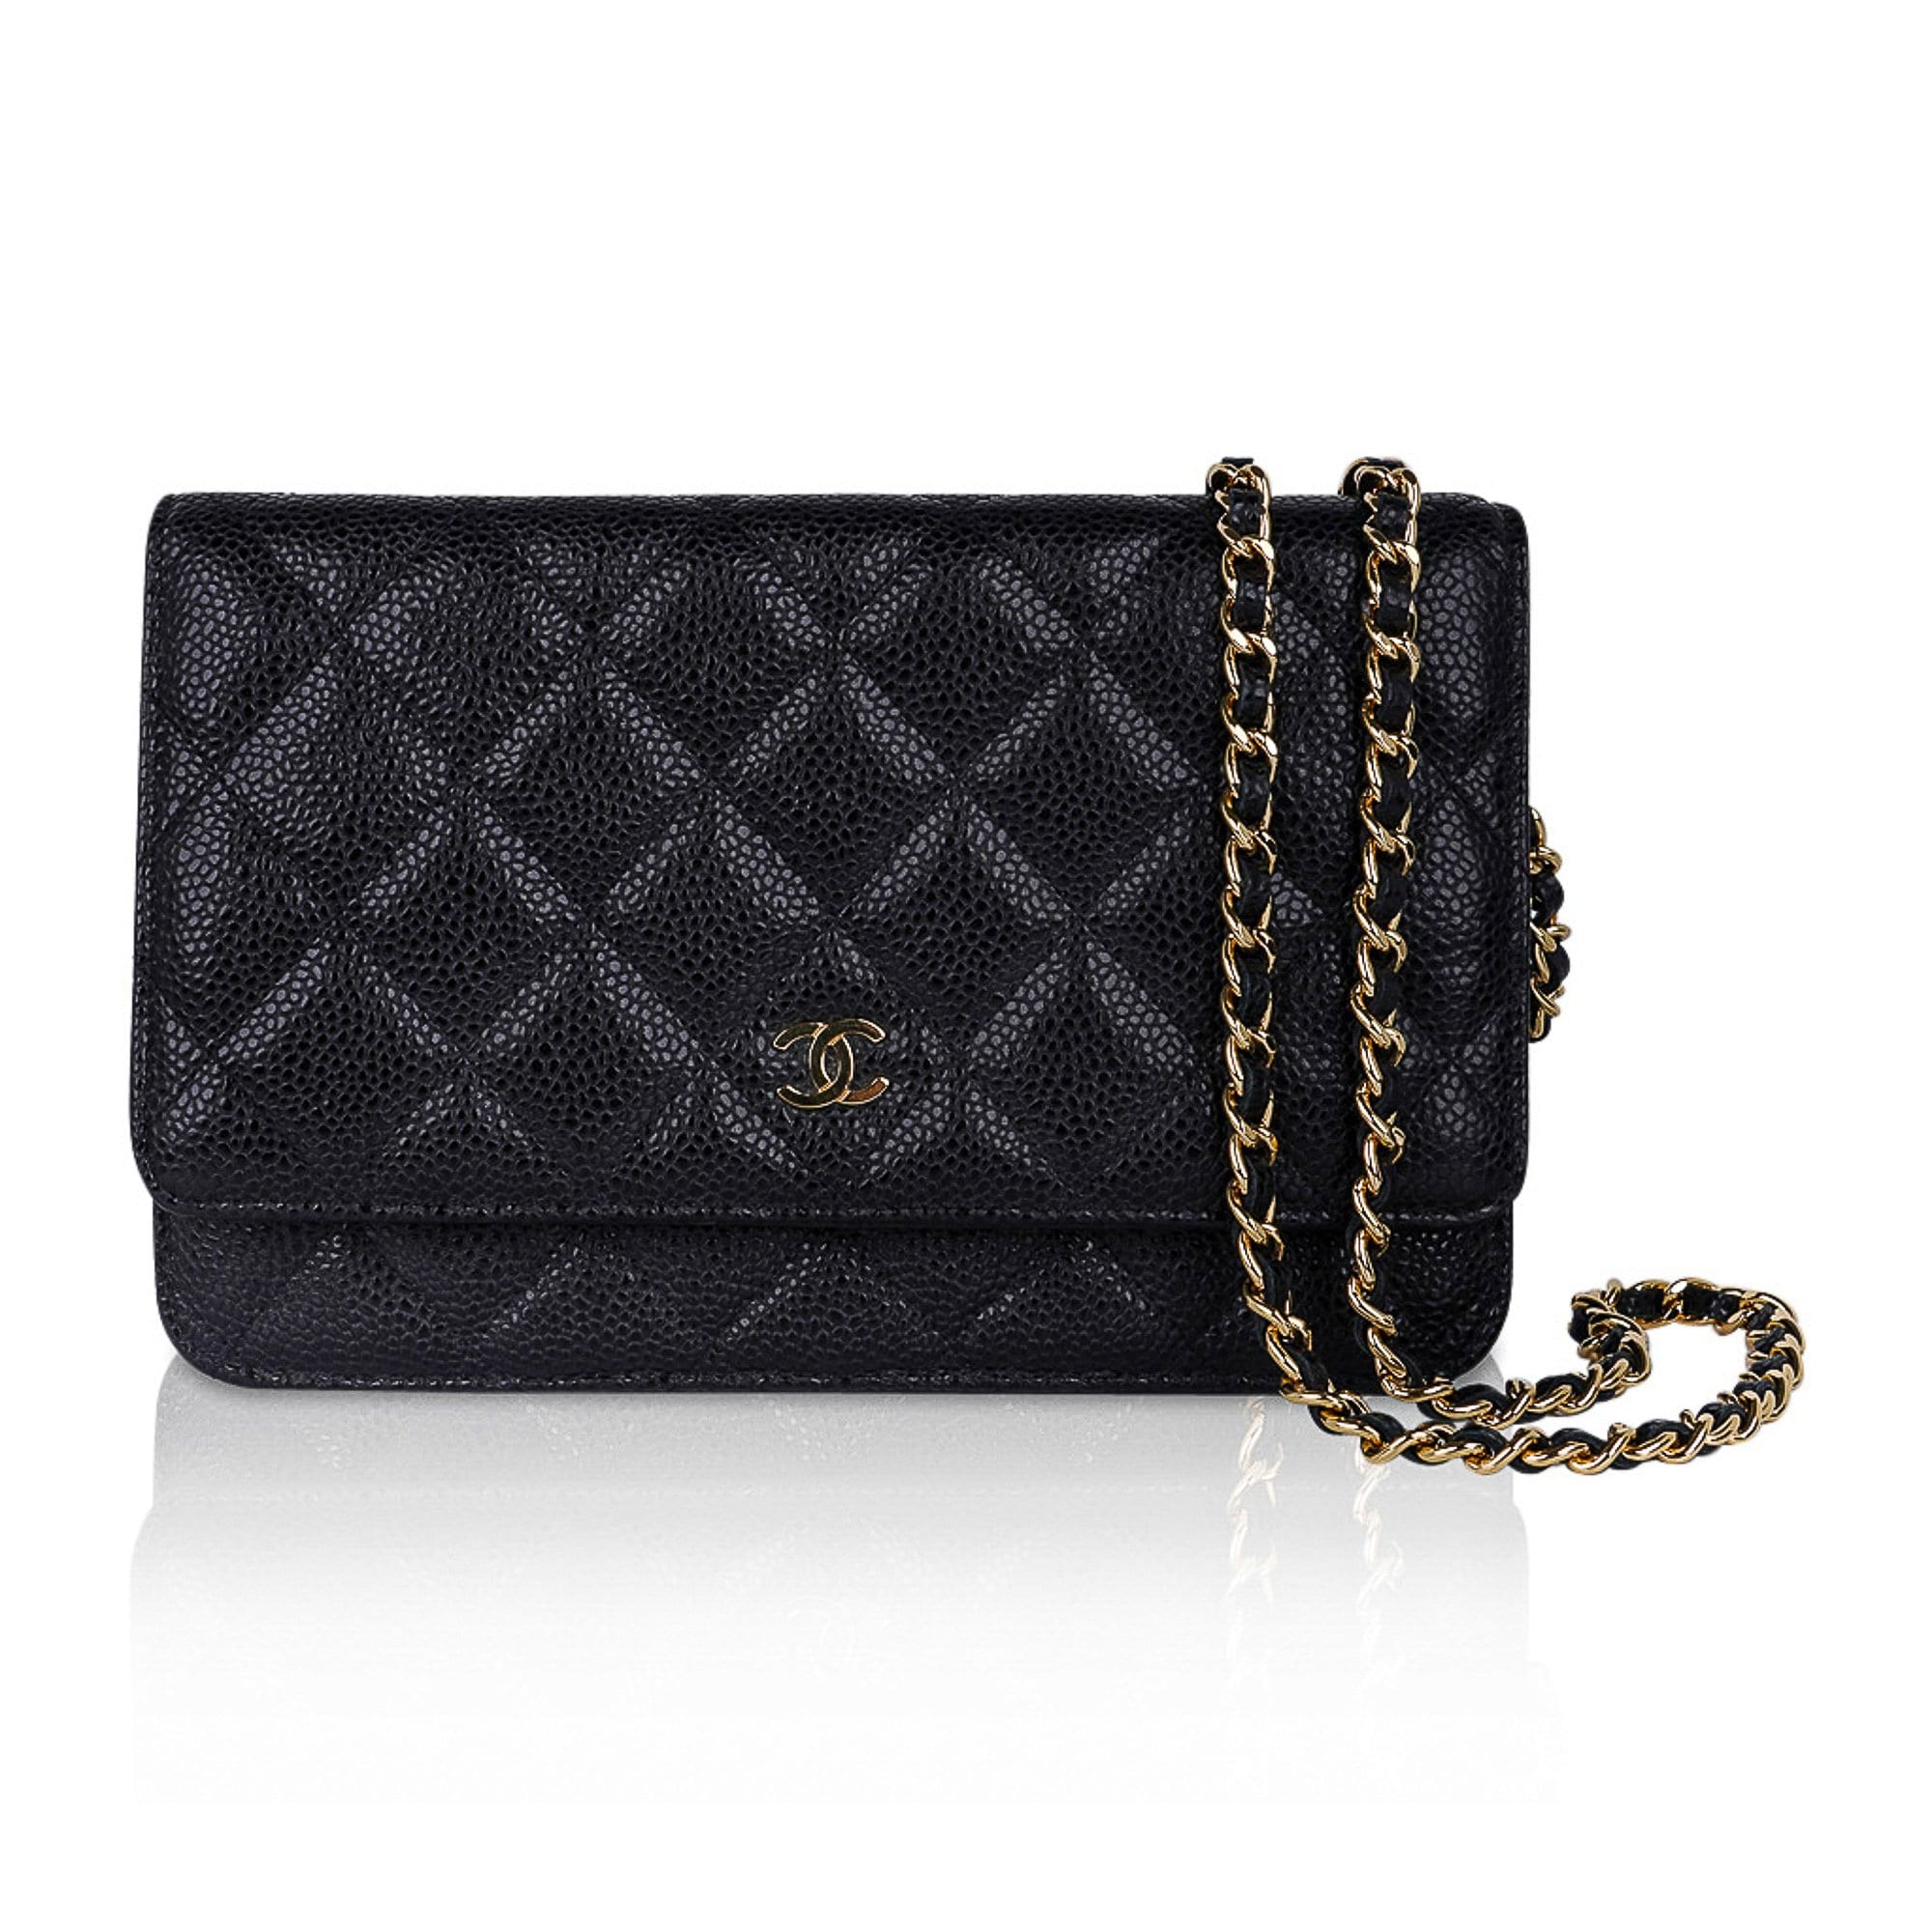 used chanel wallet on chain black